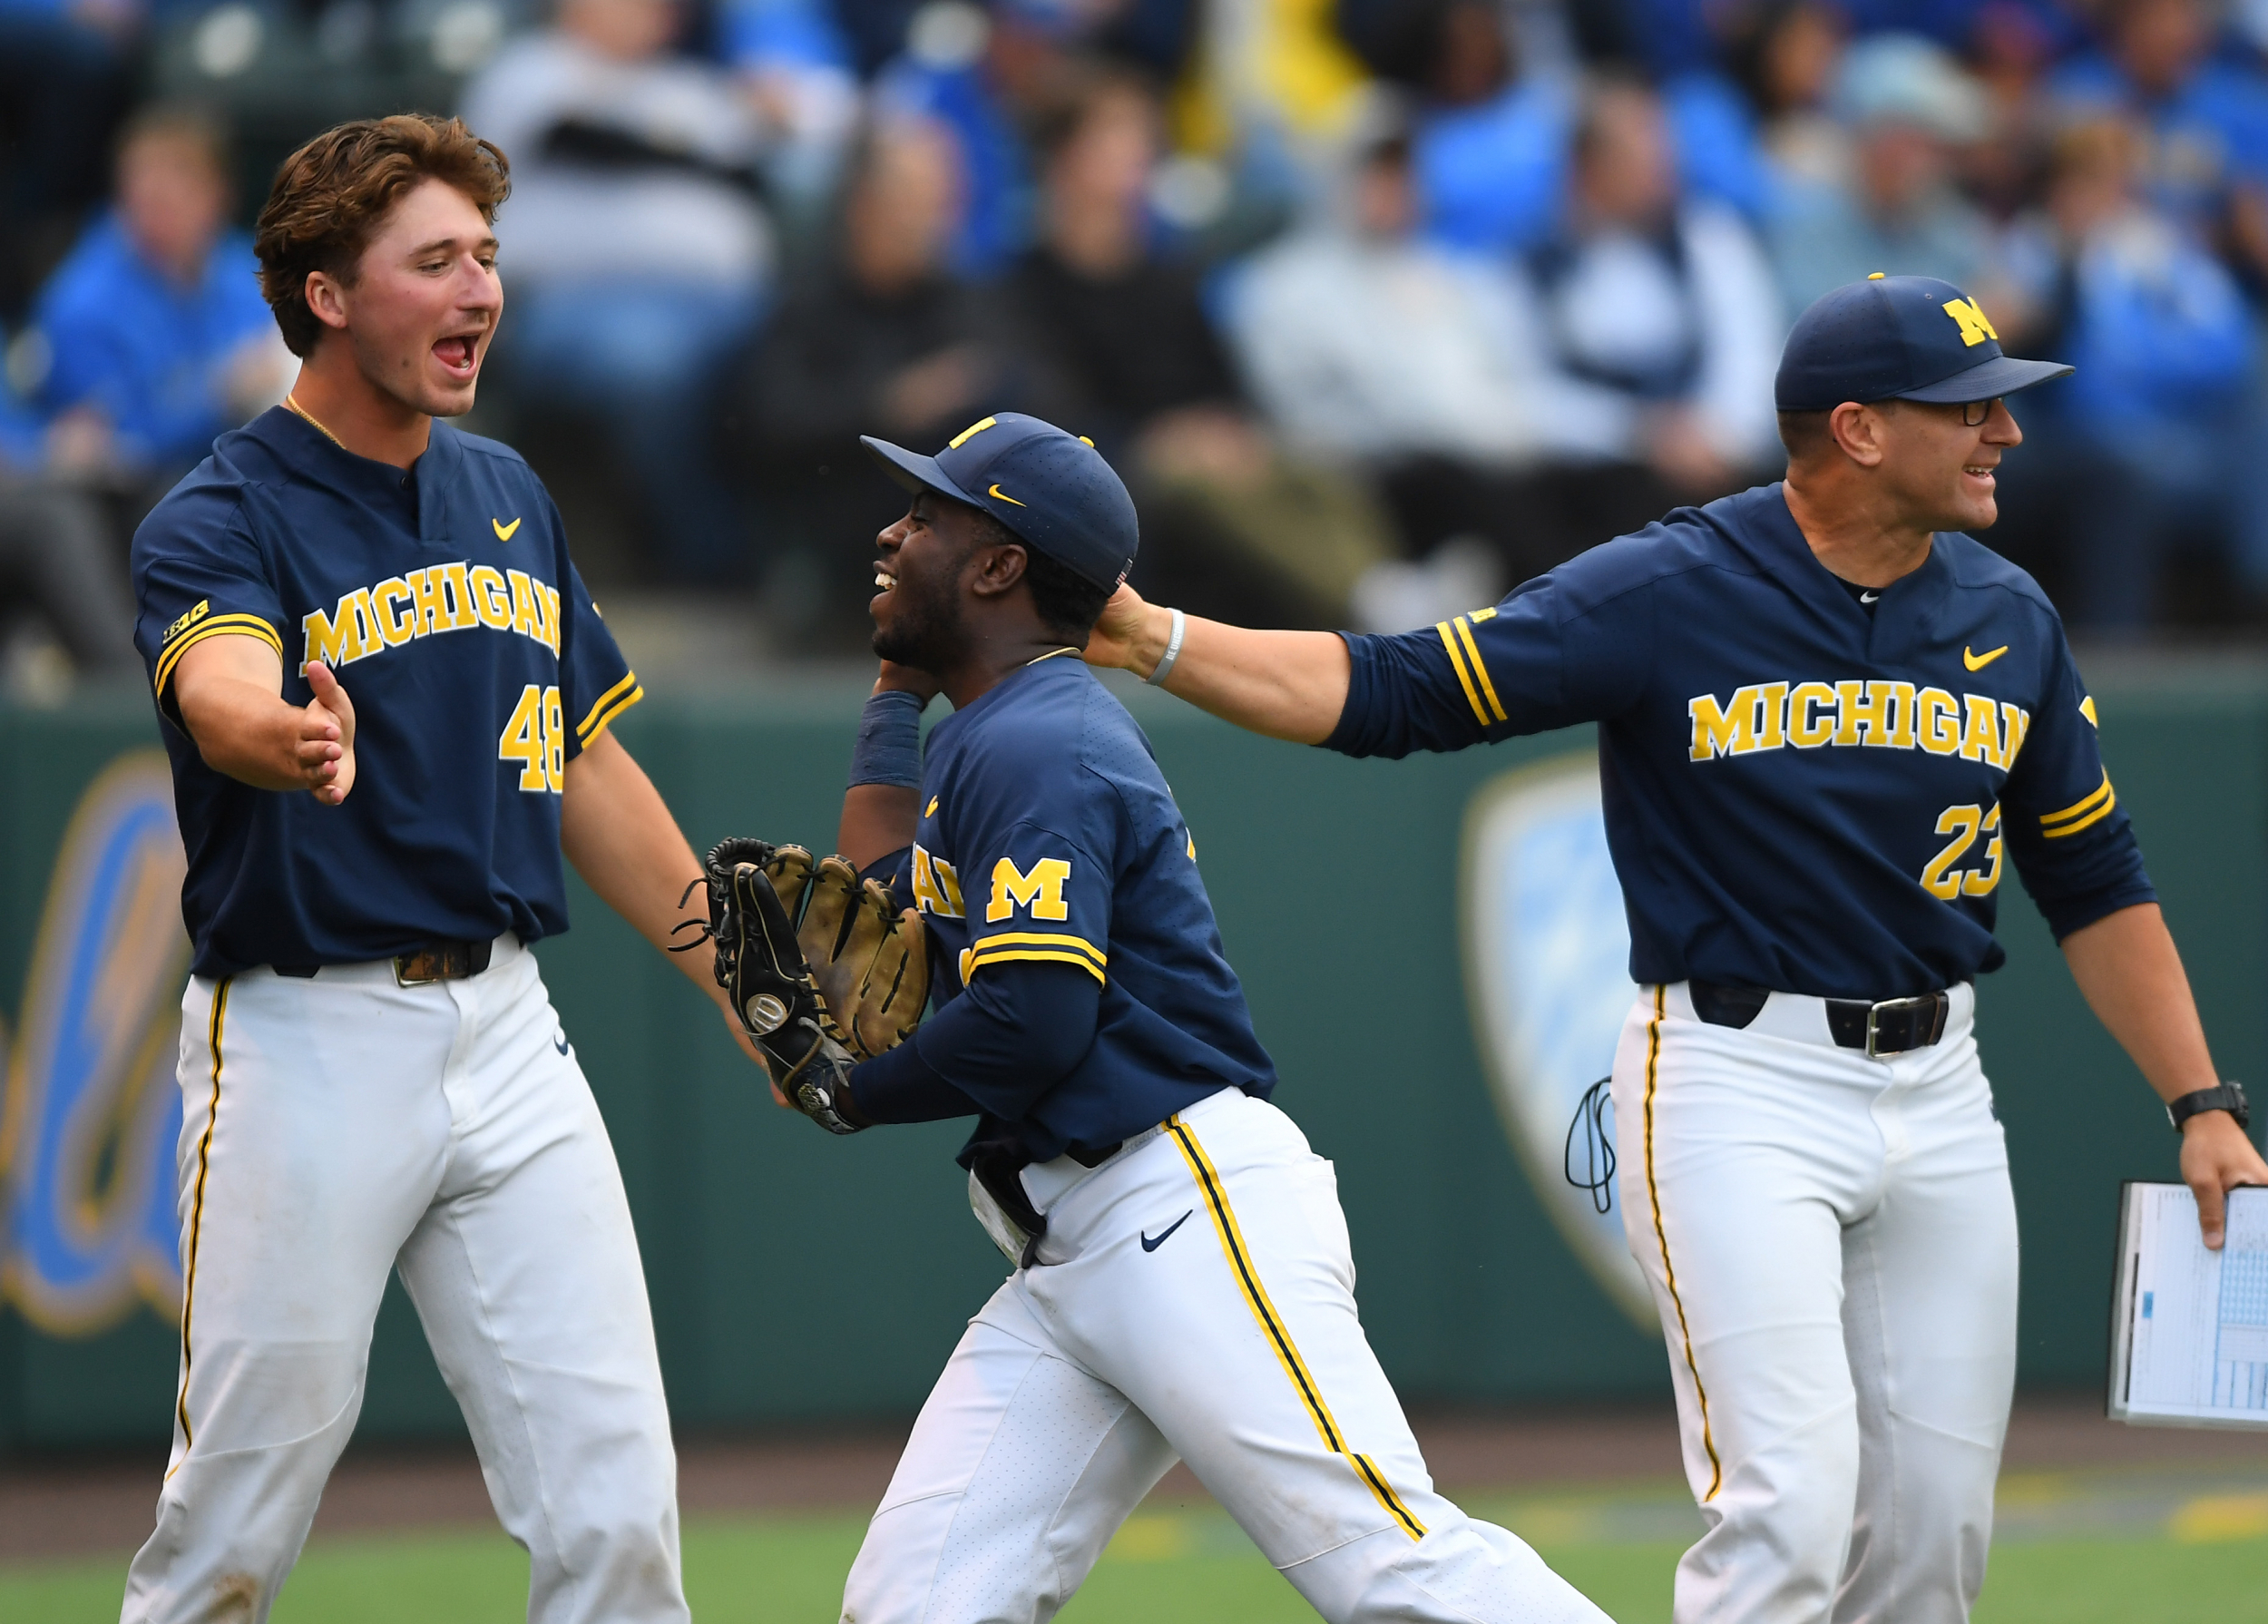 2019 NCAA Baseball Tournament College World Series Dates, TV Channels, Schedule and Odds